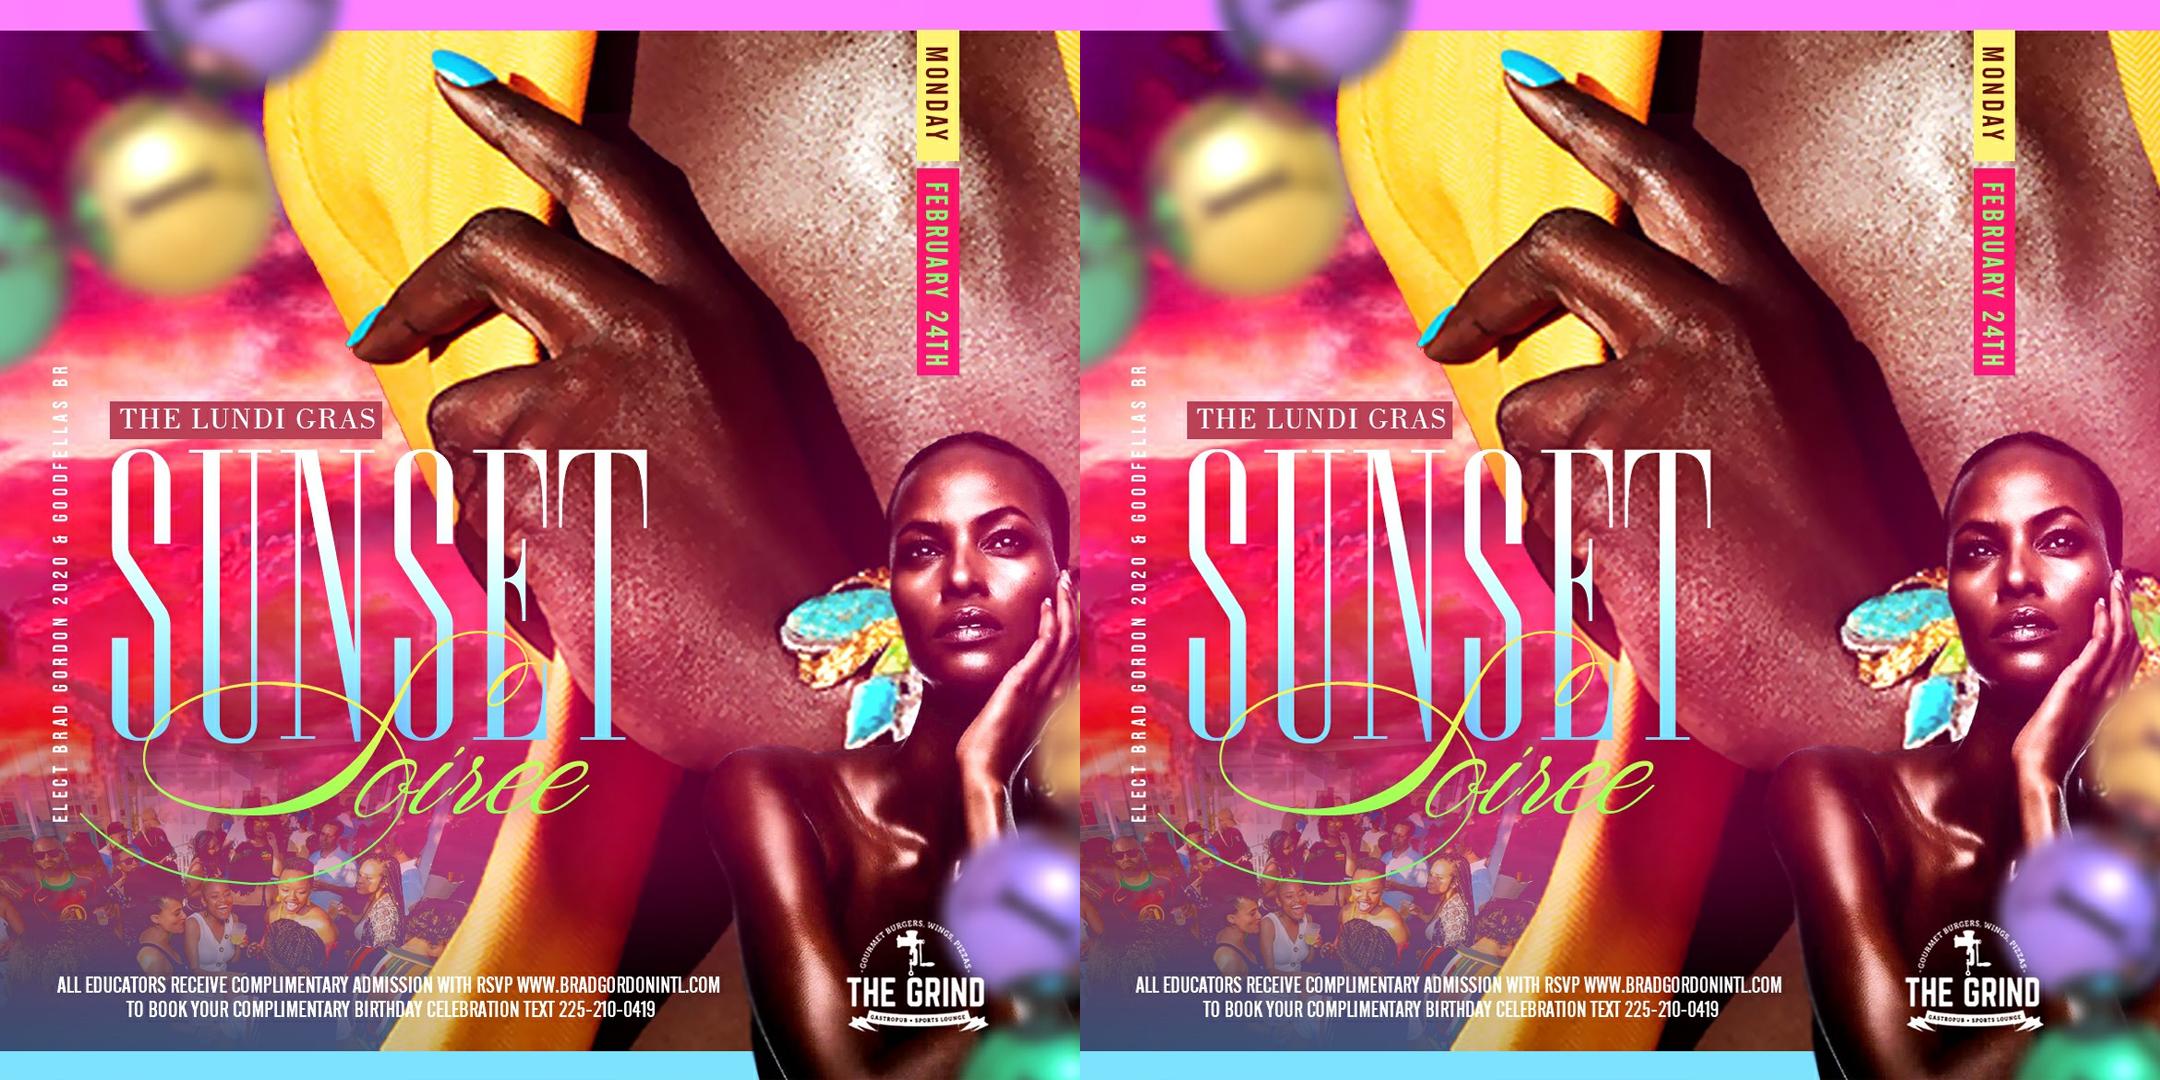 The Lundi Gras Sunset Soiree at The Grind